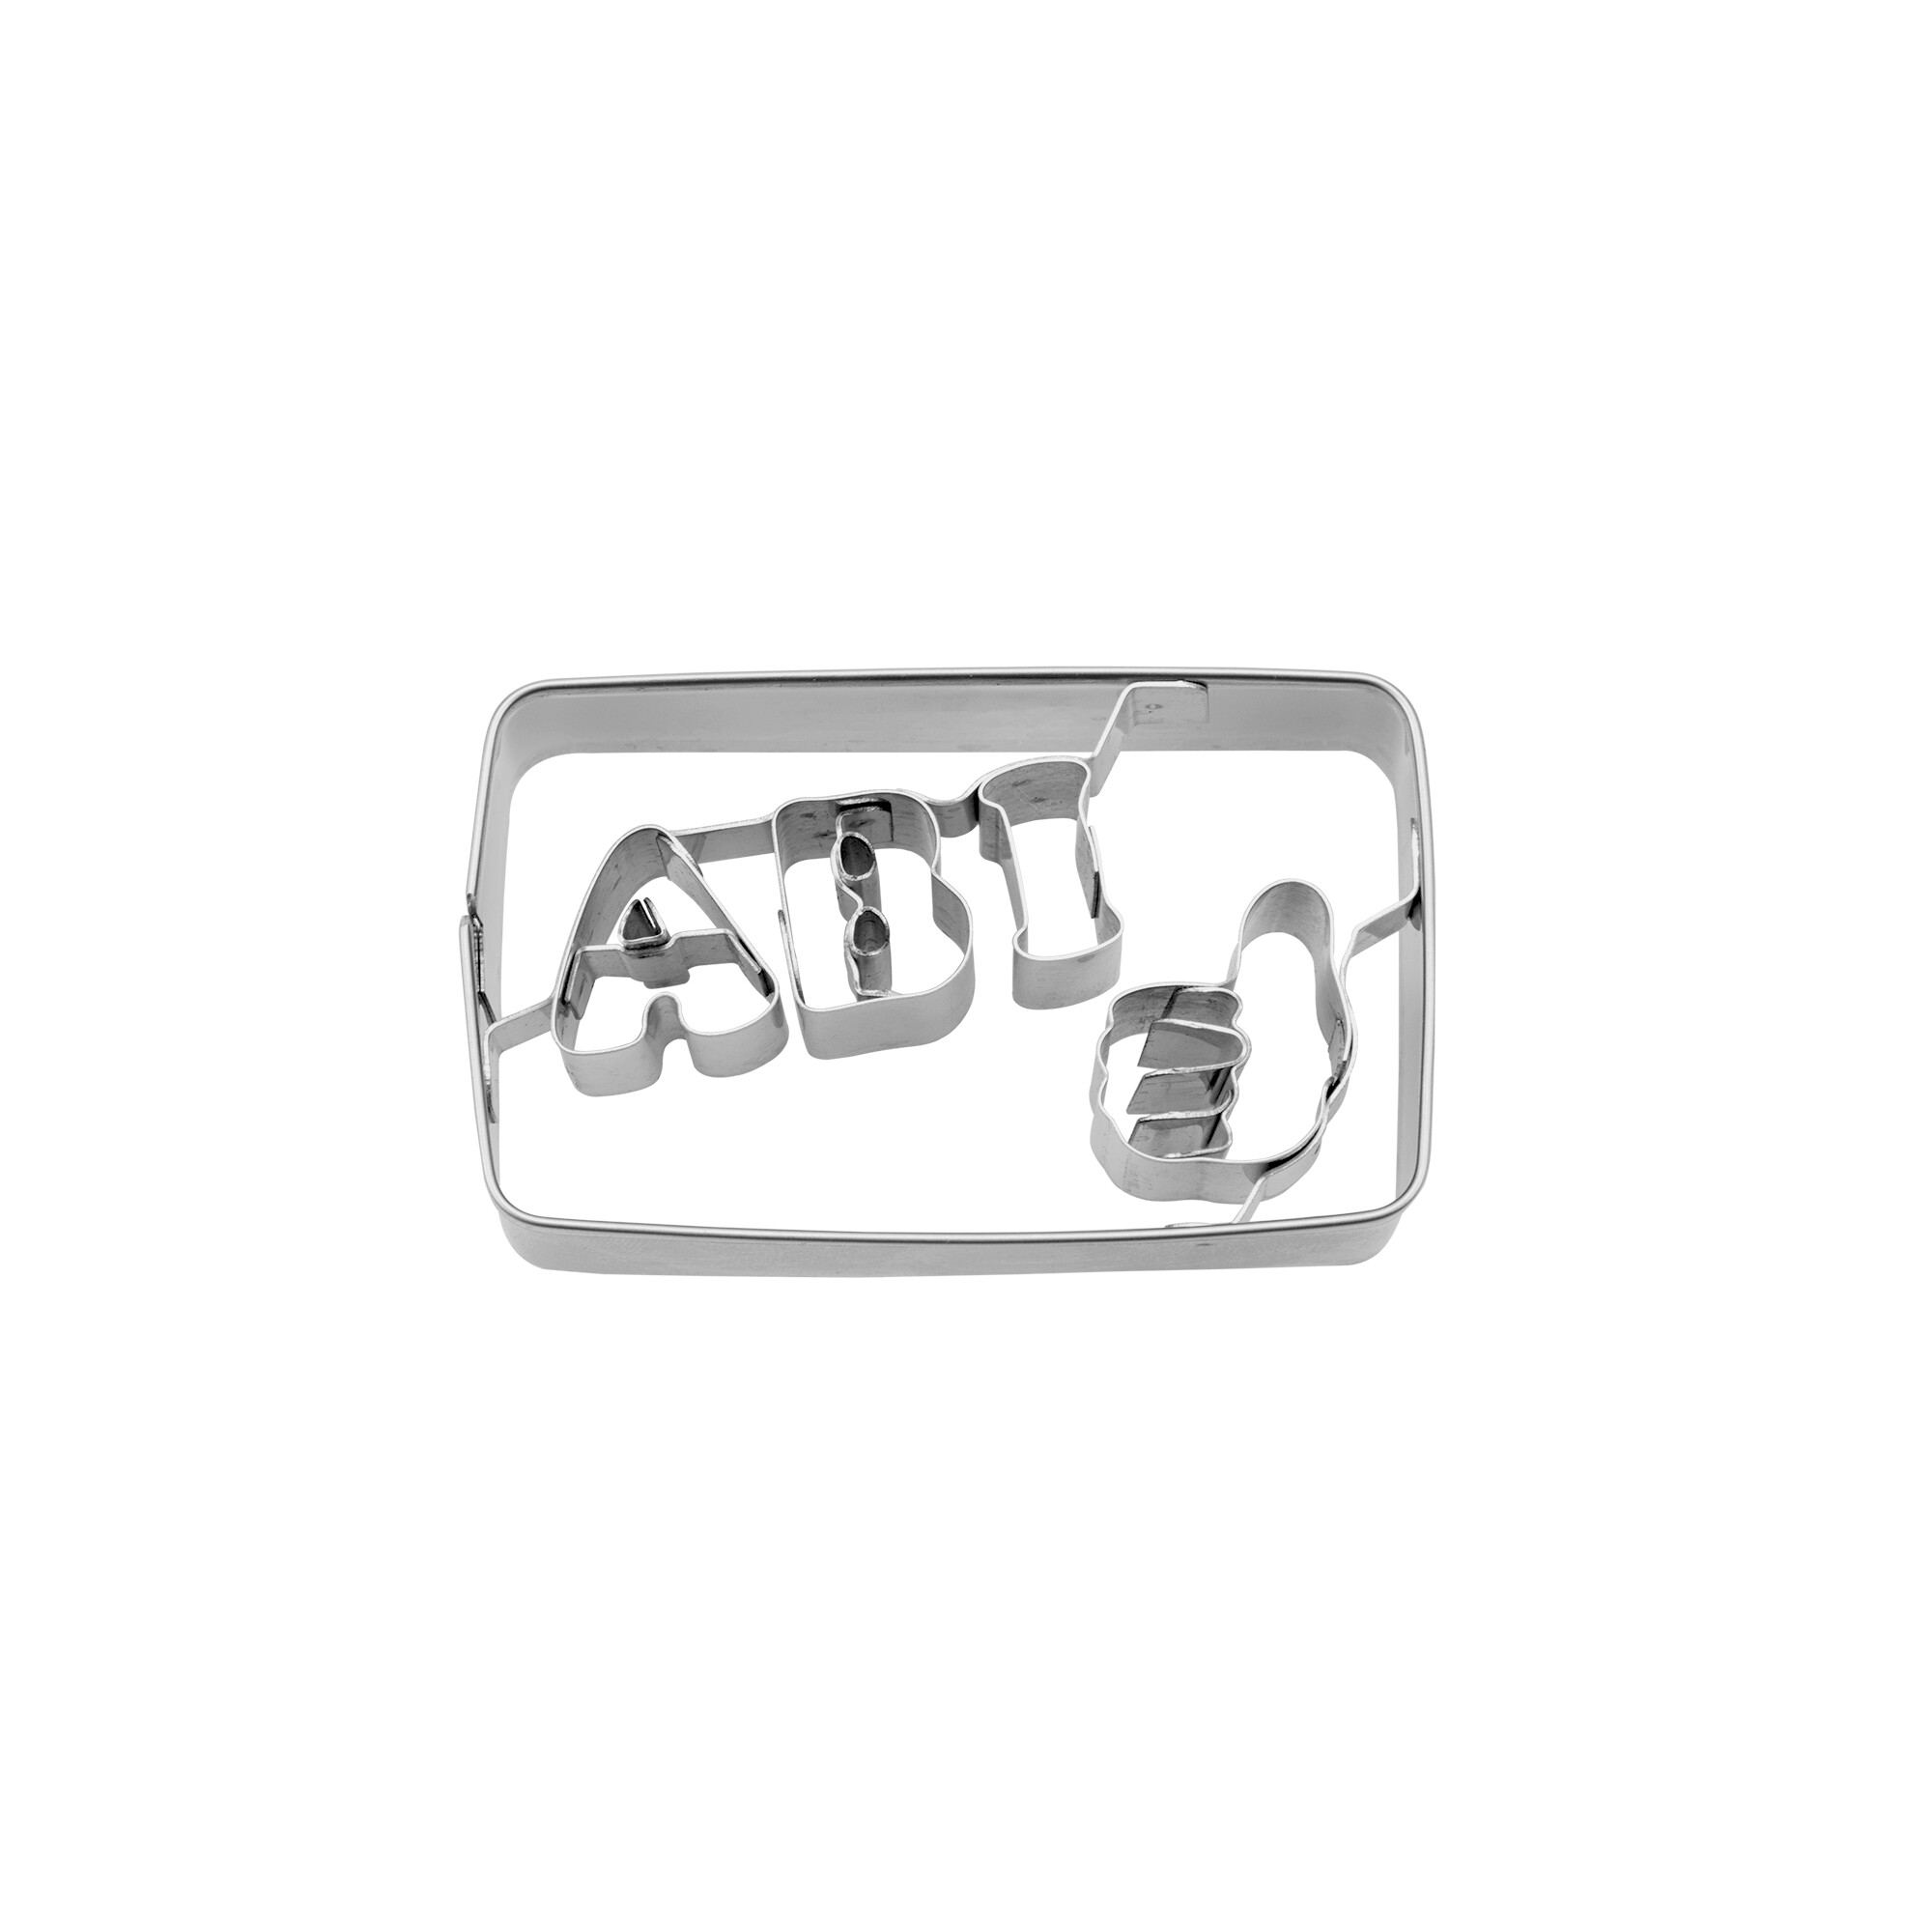 Cookie cutter with stamp – ABI